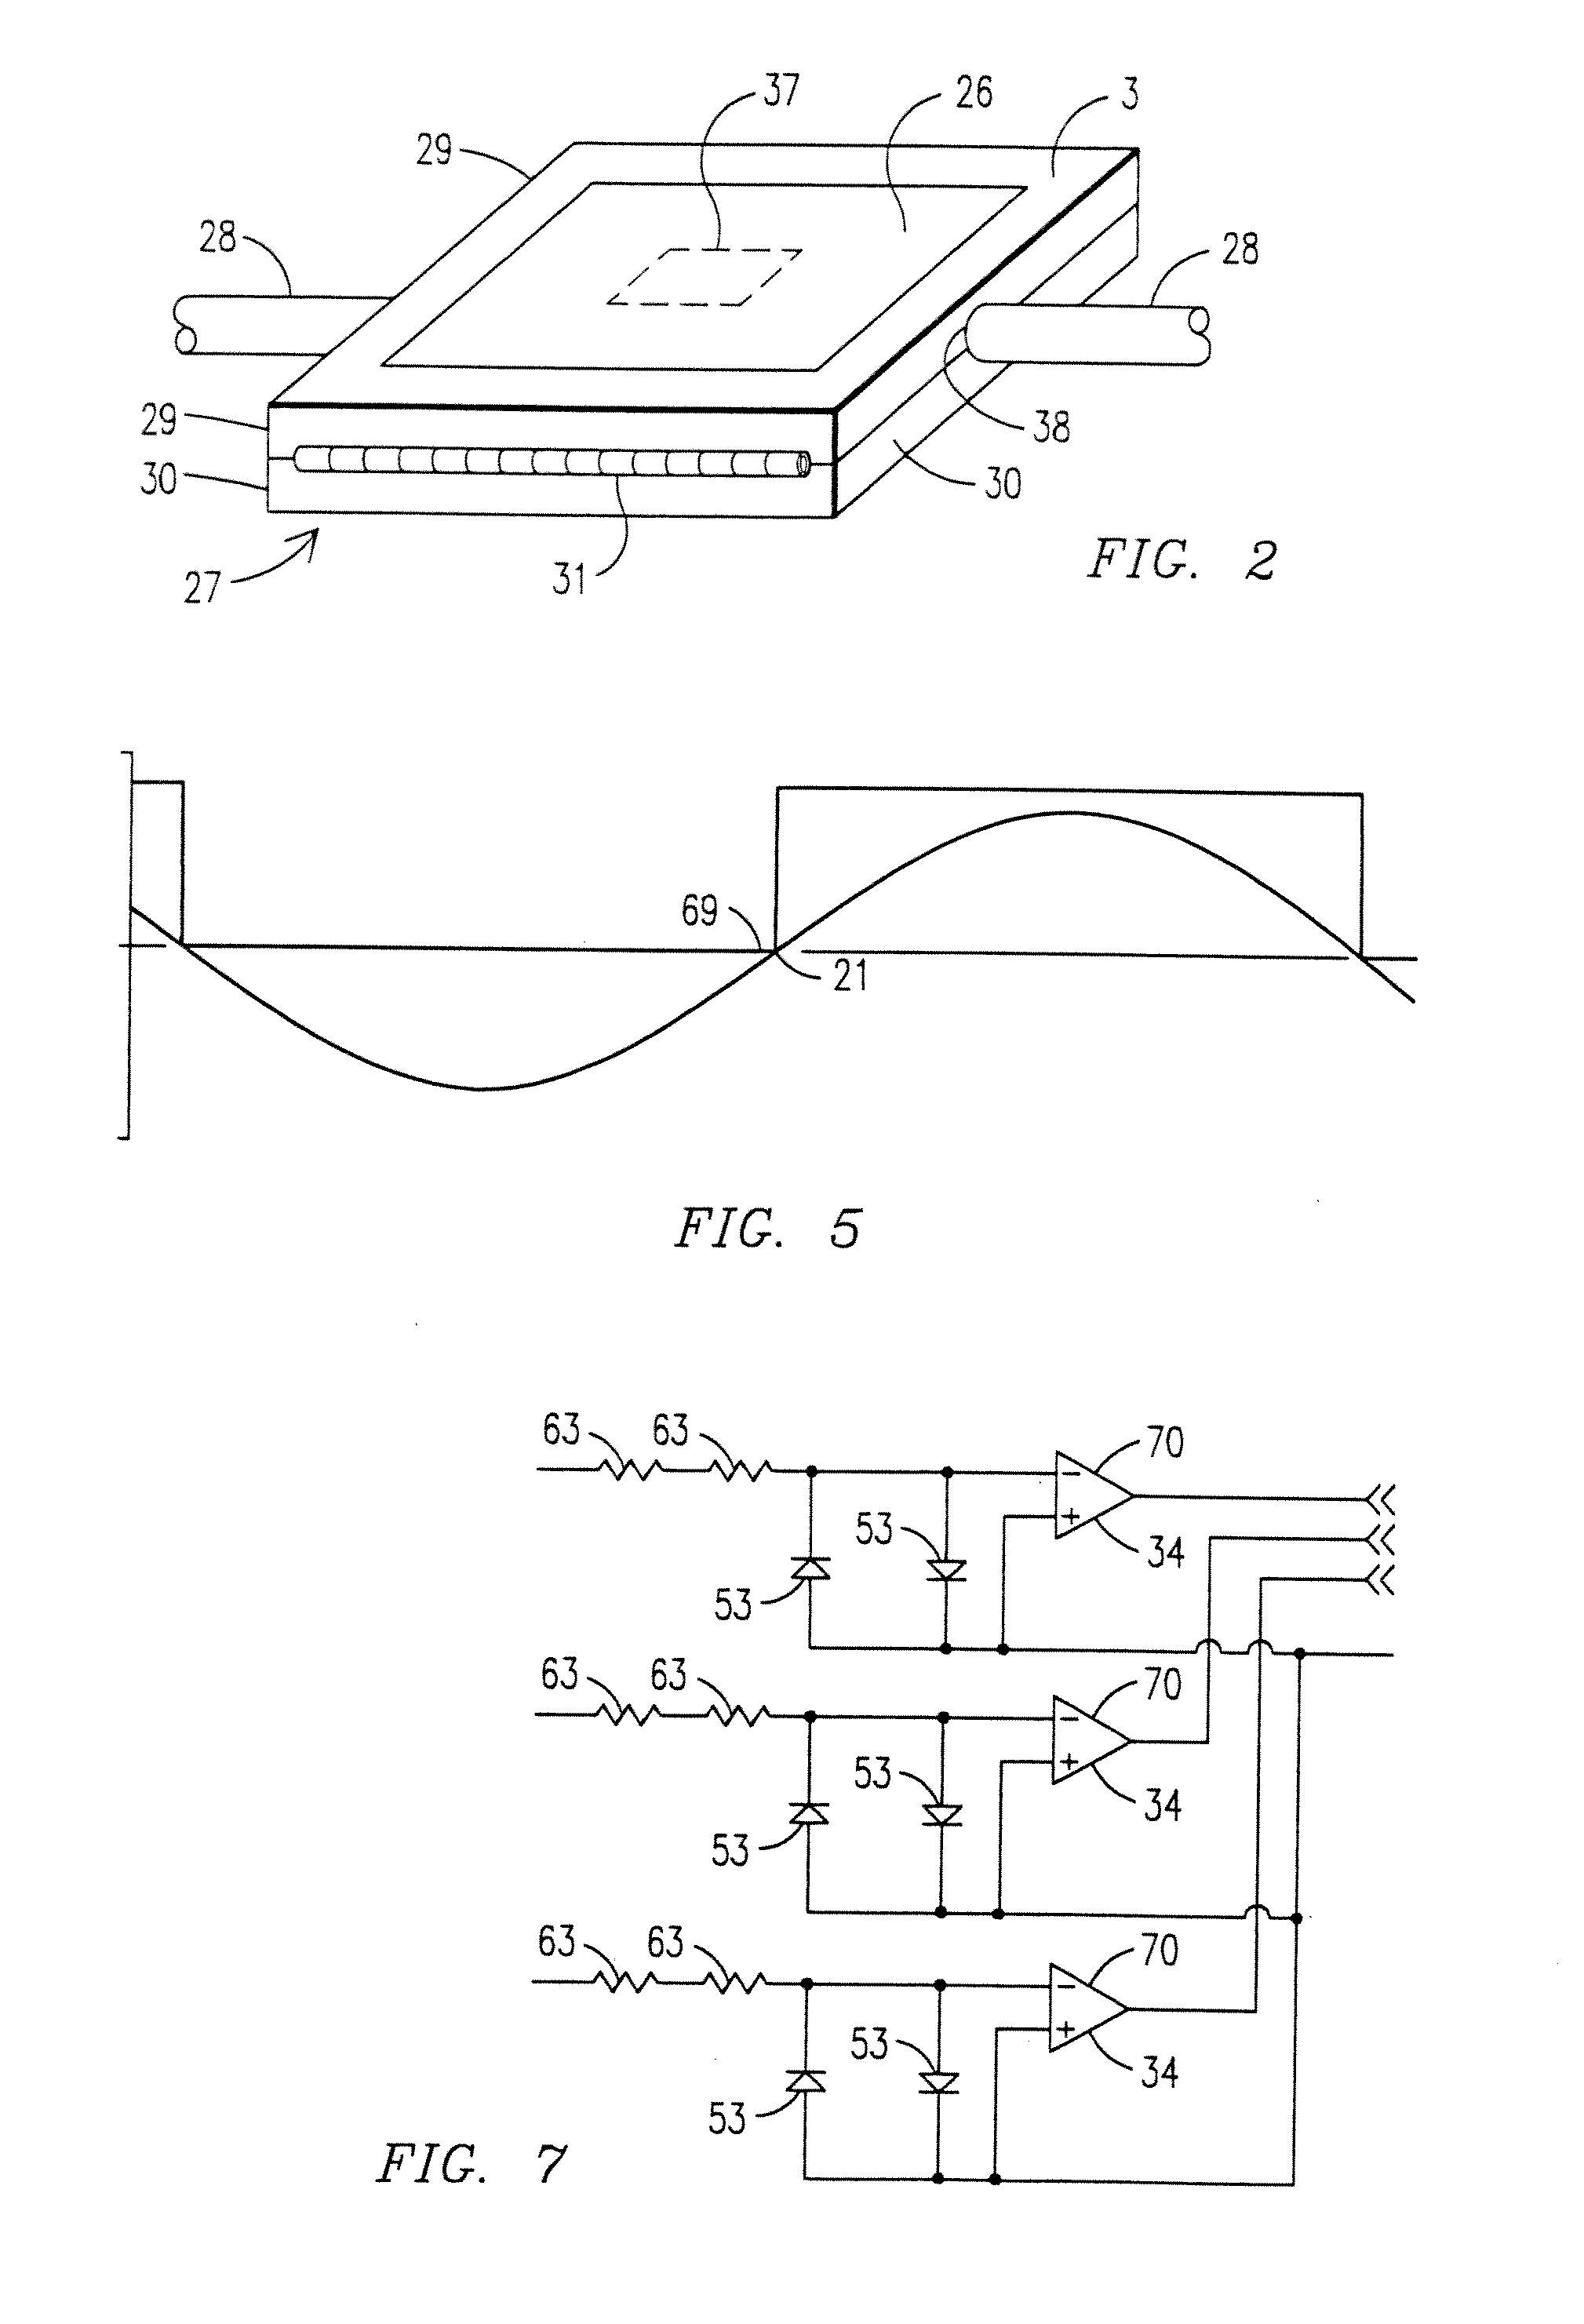 System and method to manage energy usage